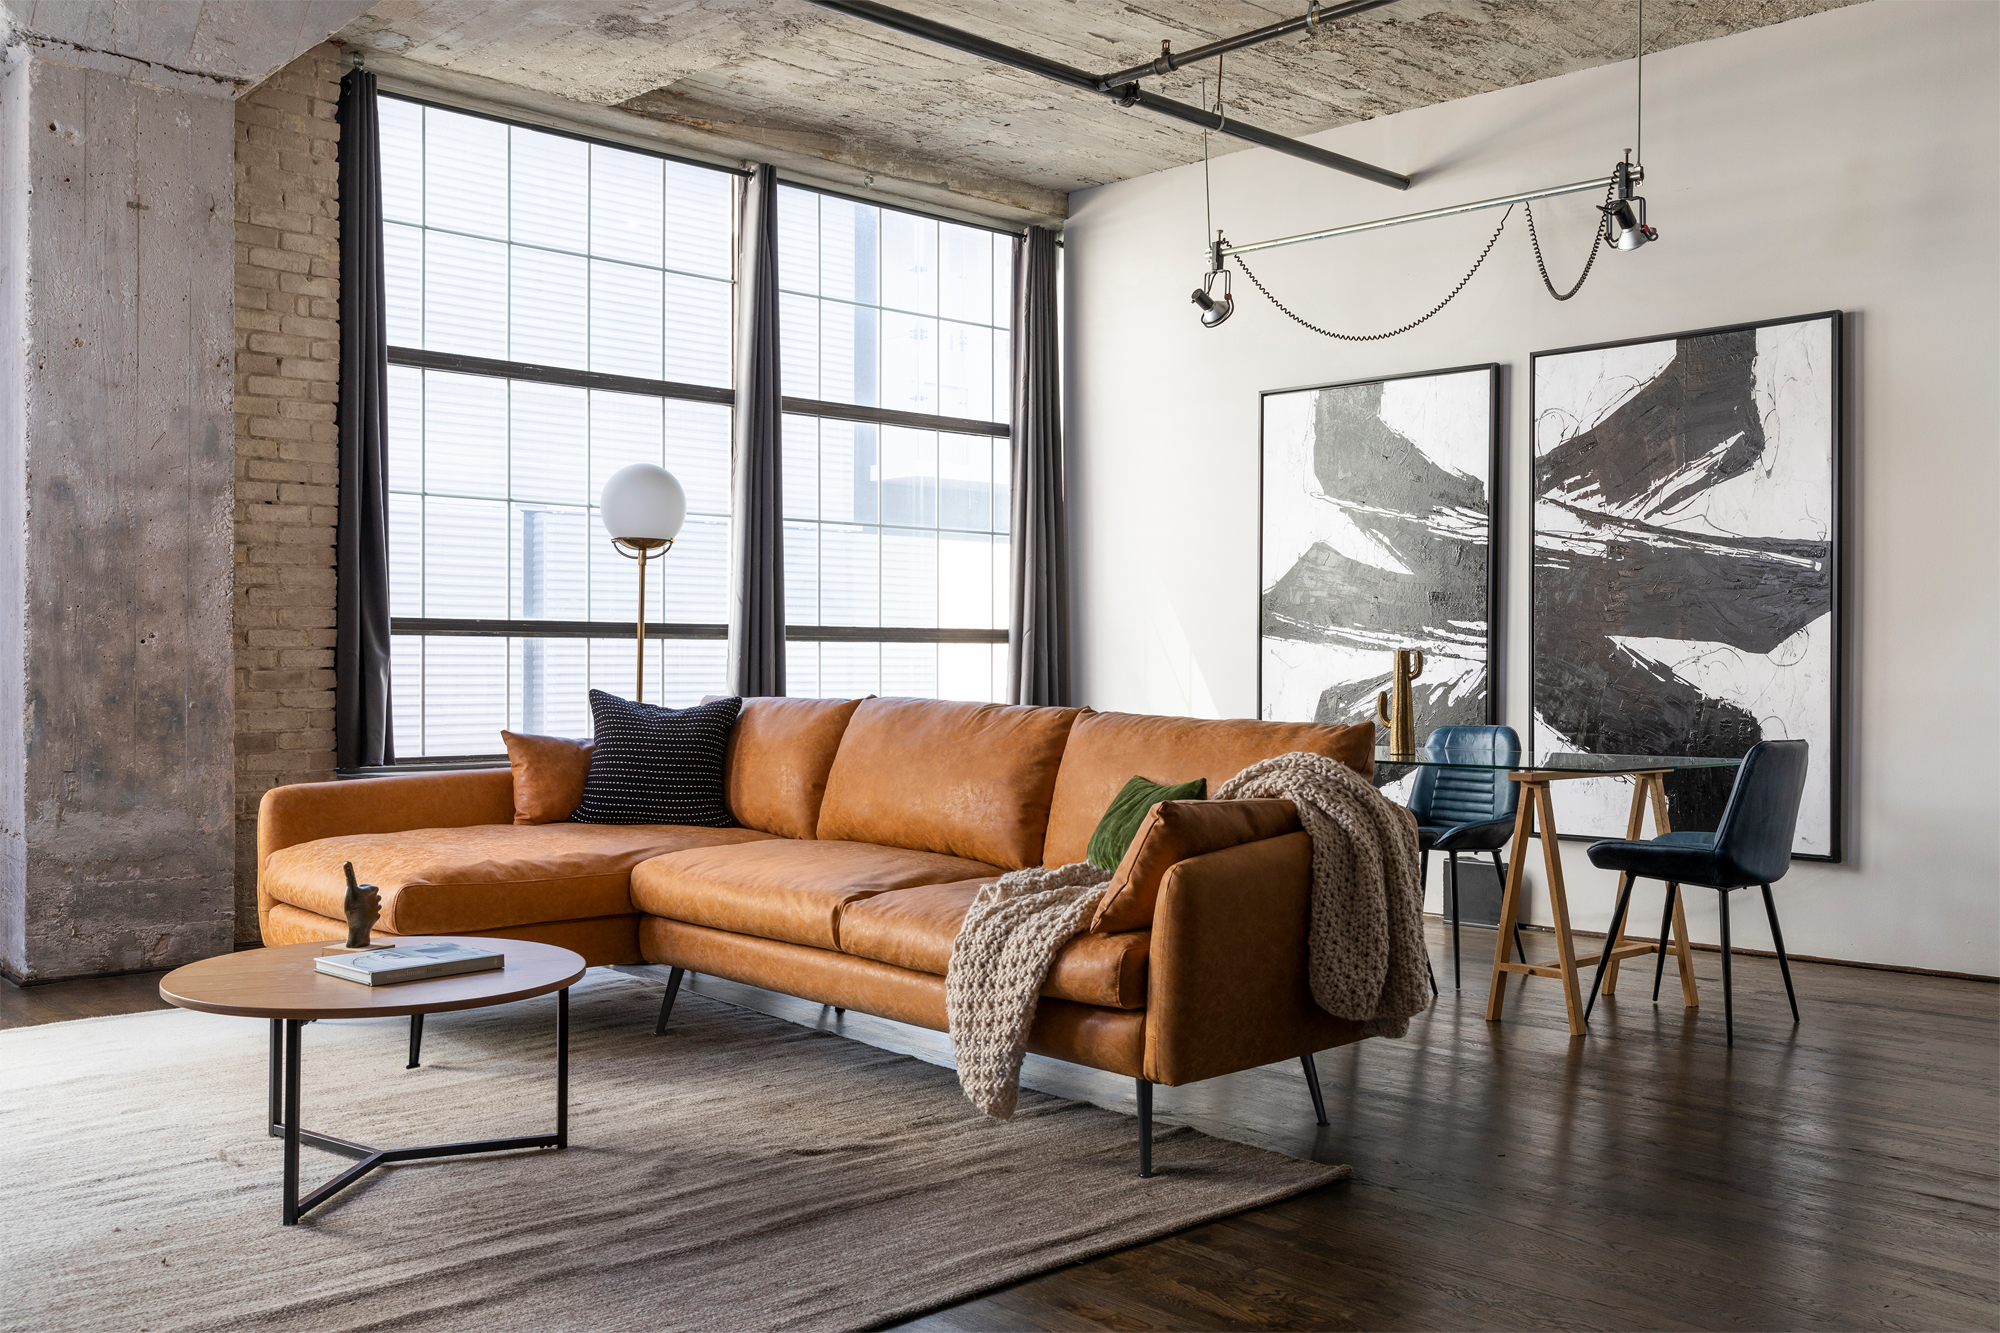 park sectional sofa shown in distressed vegan leather with black legs left facing